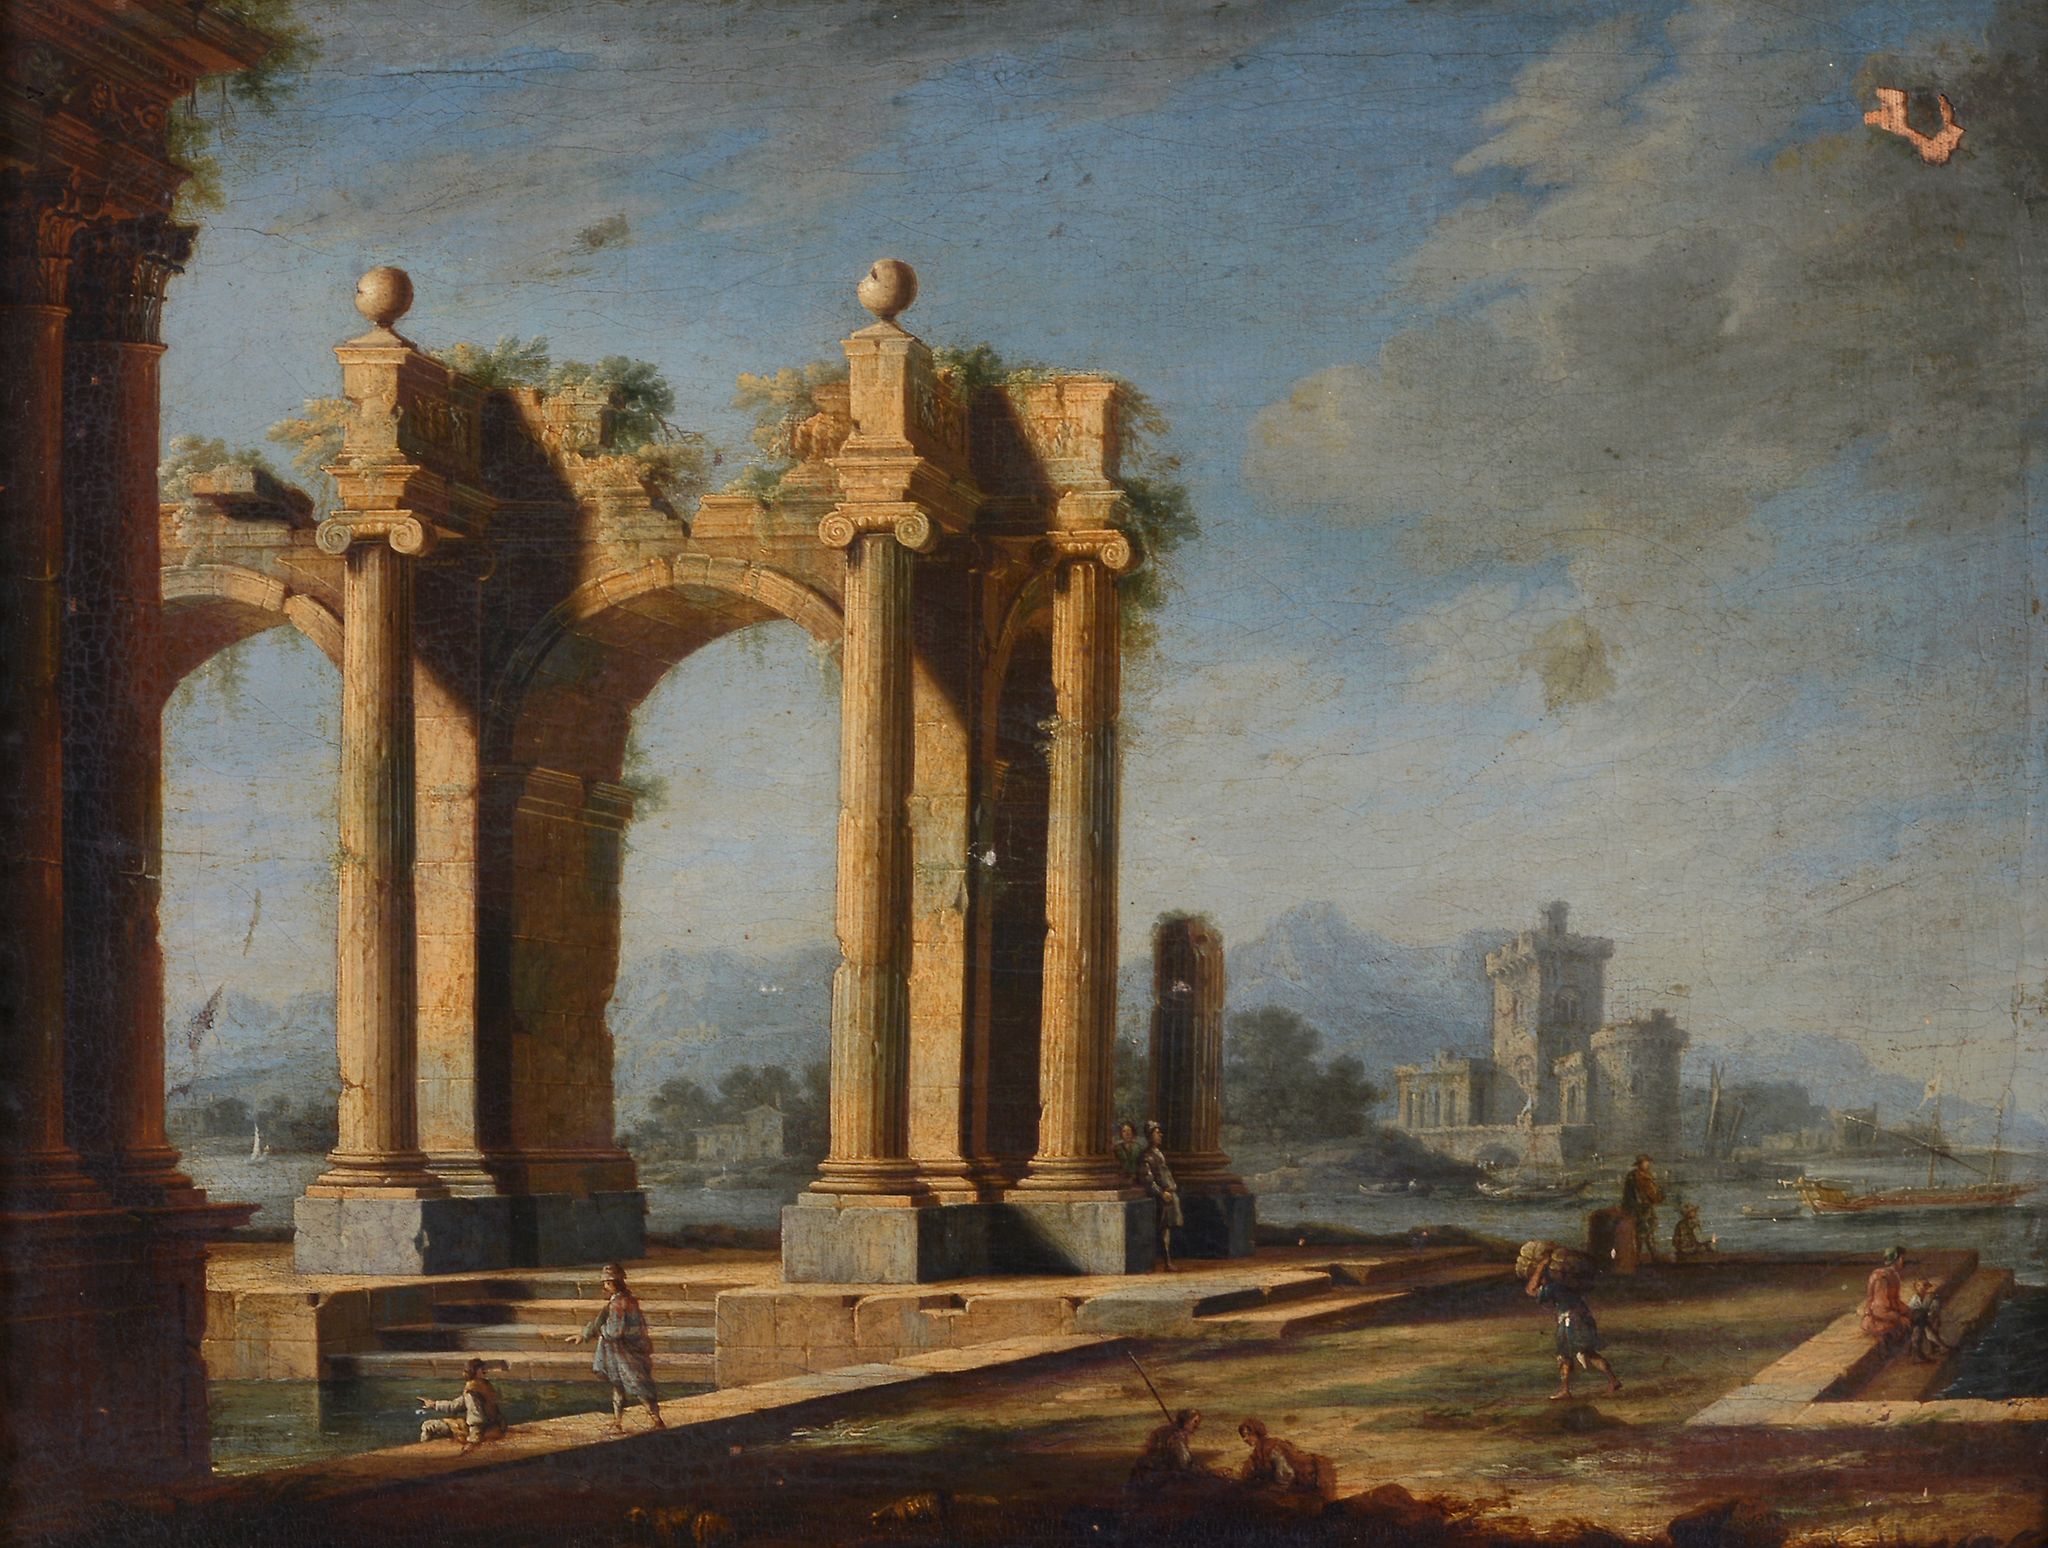 Gennaro Greco (1663–1714) - A capriccio of classical ruins, with a port and boats beyond Oil on